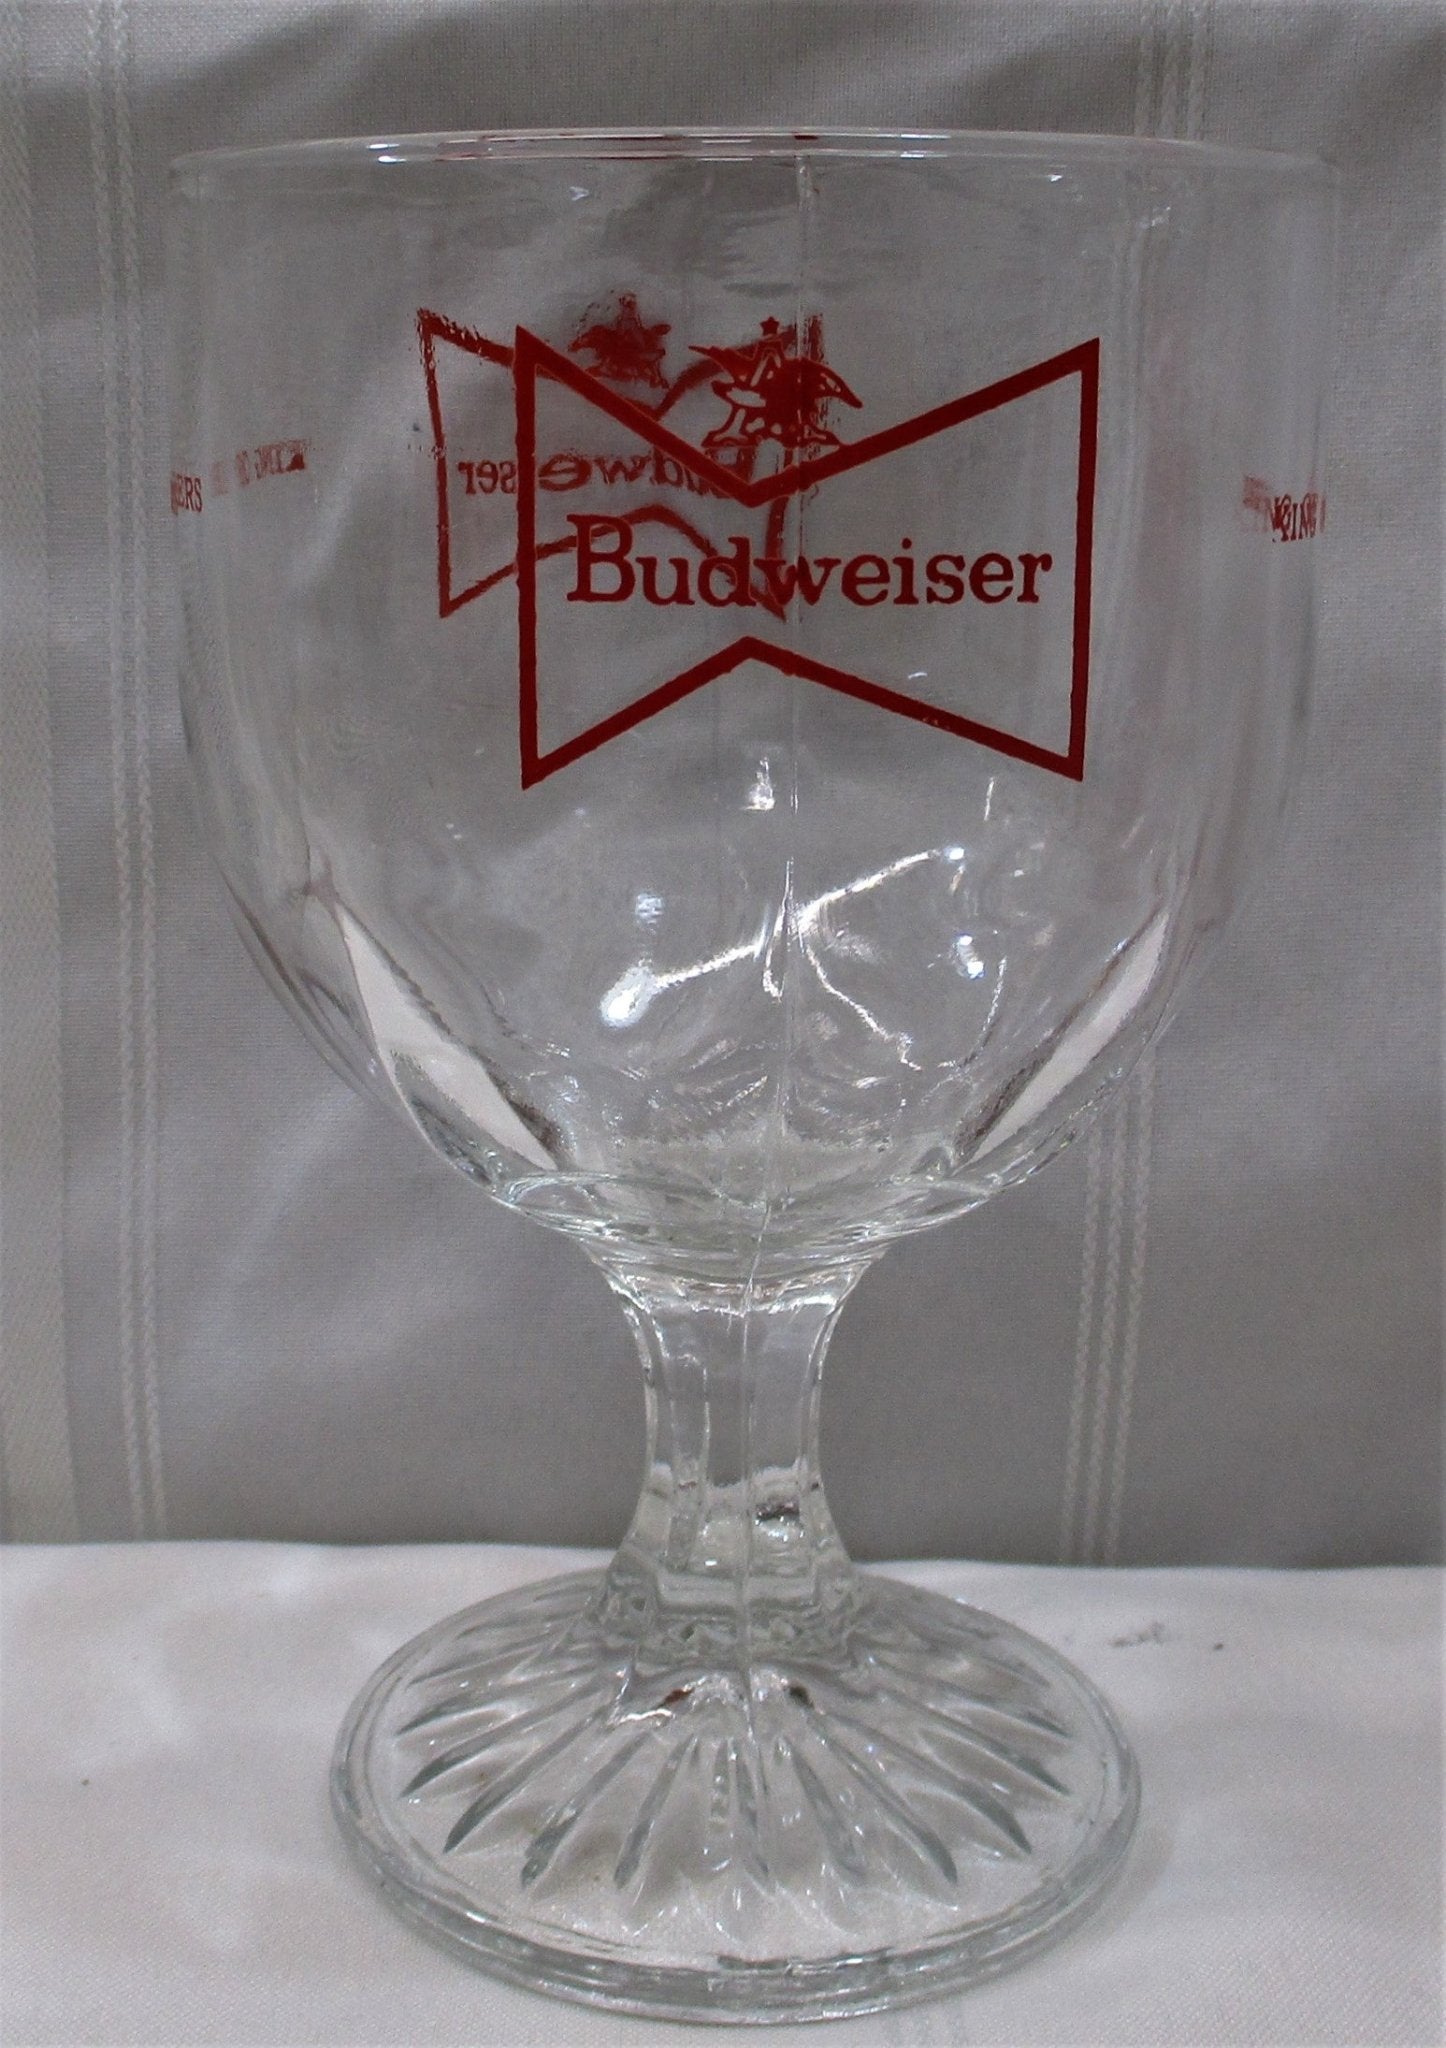 Budweiser King of Beers Pedestal Beer Glass [74685 - Cactus Jax Unique Collectibles